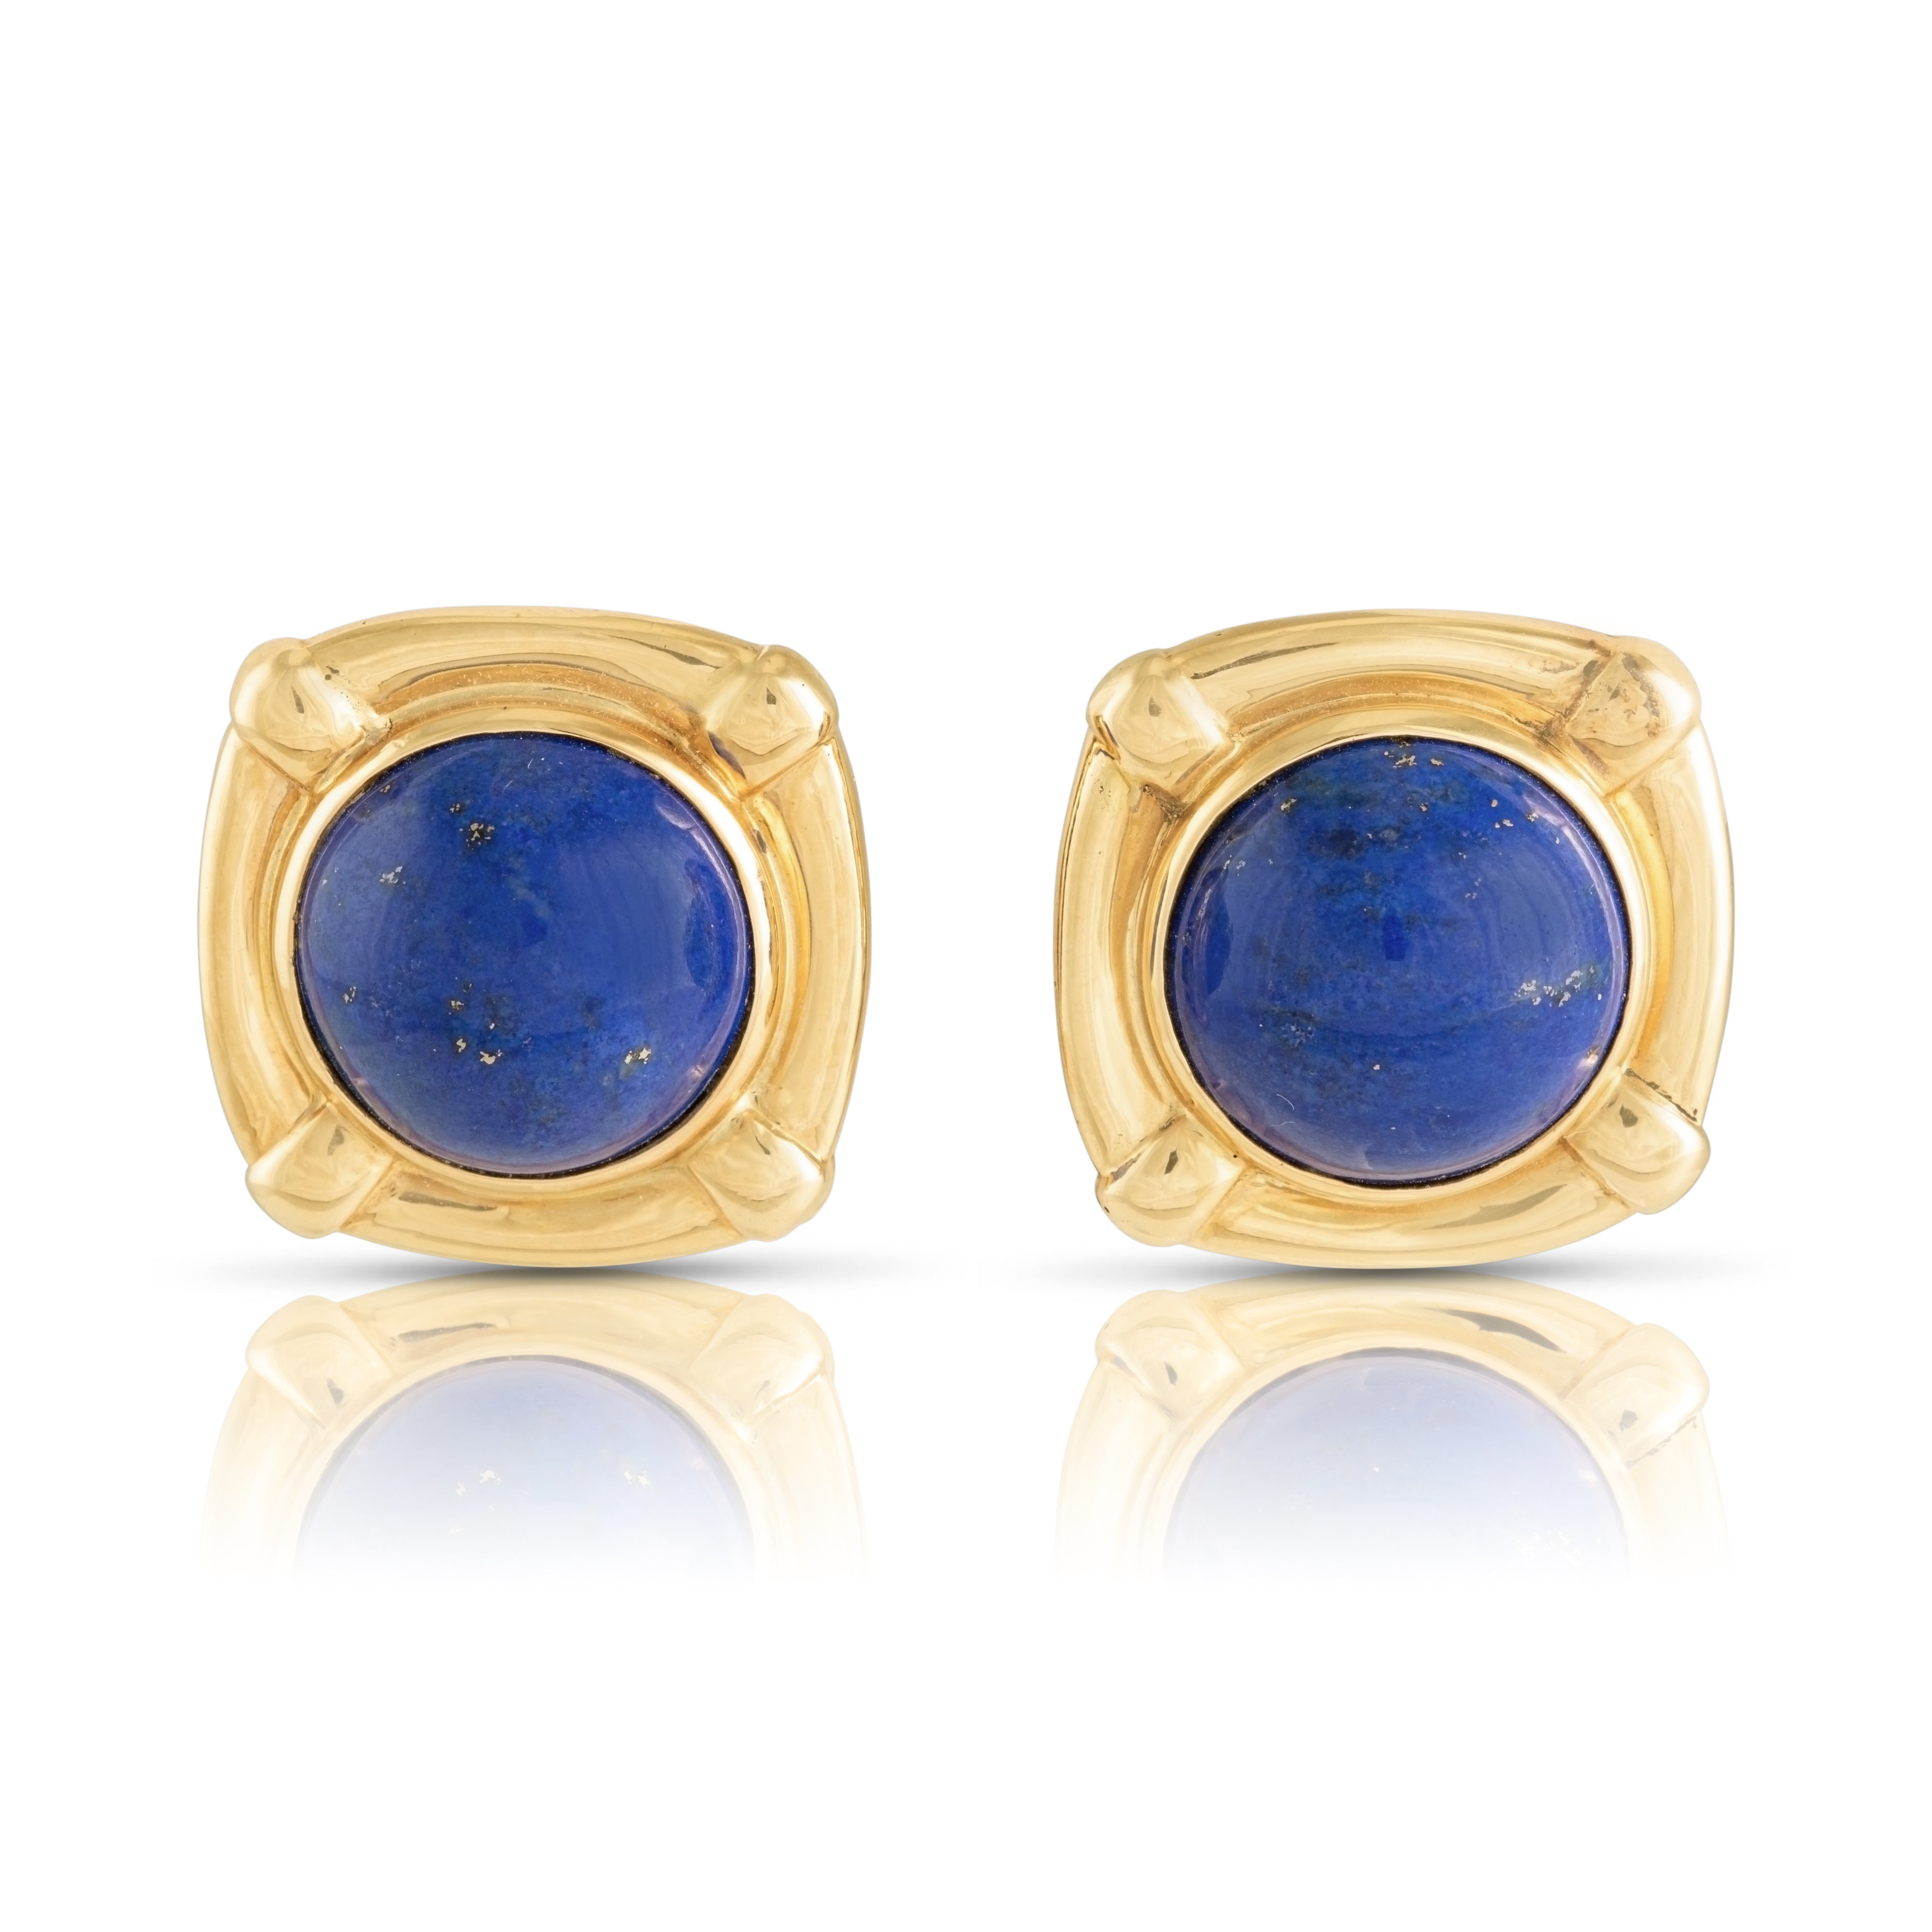 Vintage lapis lazuli earrings in 18ct gold square frames.